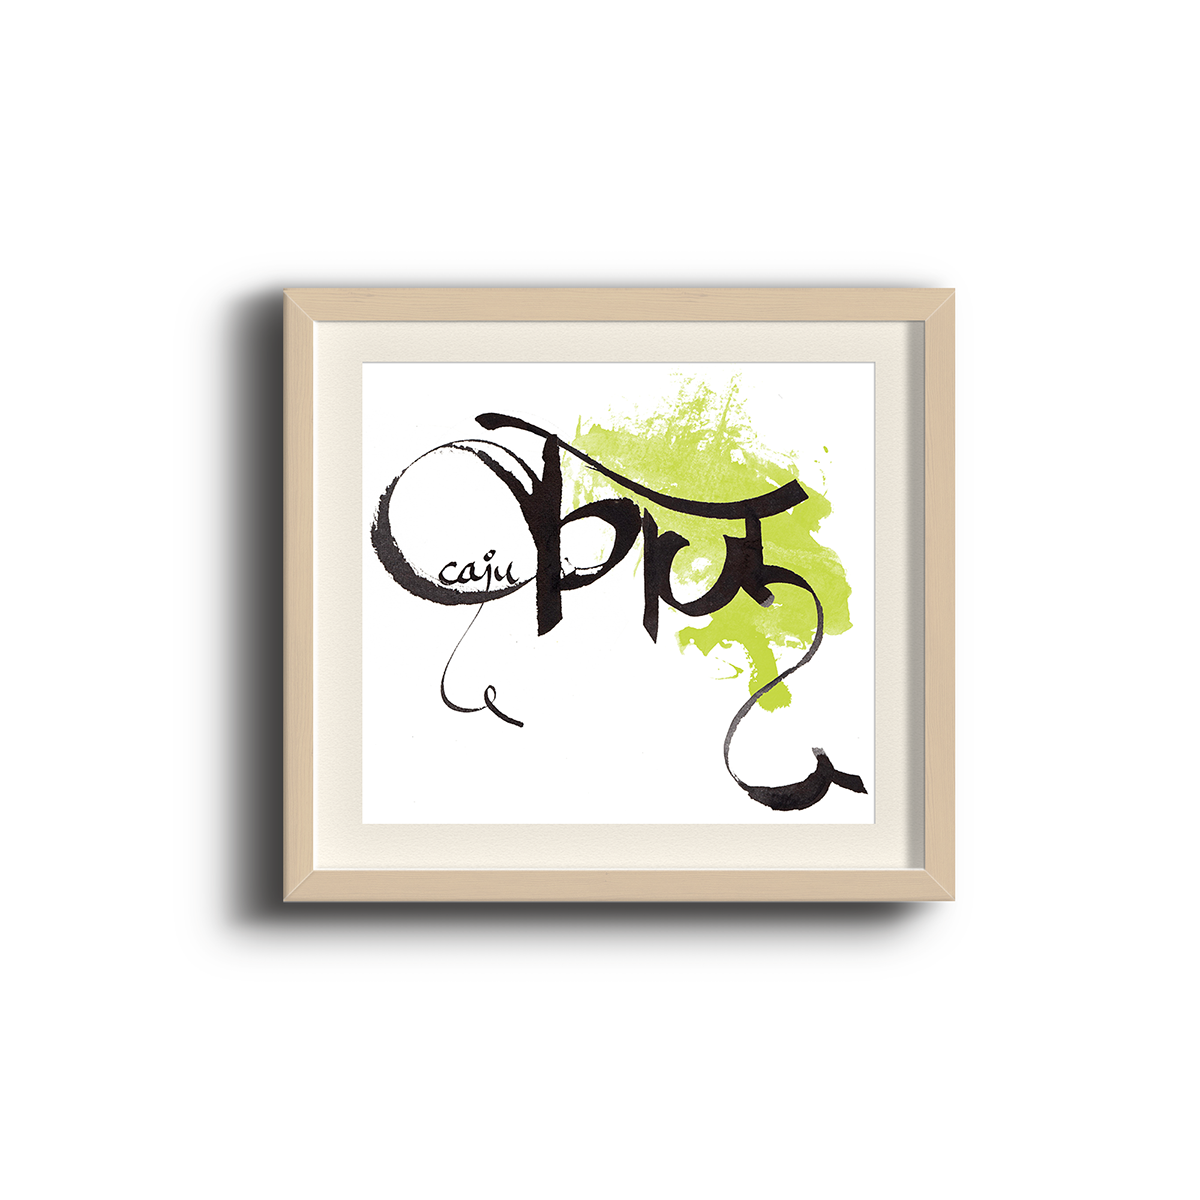 expressive calligraphy art design language French portugese persian hindi Calligraphy  